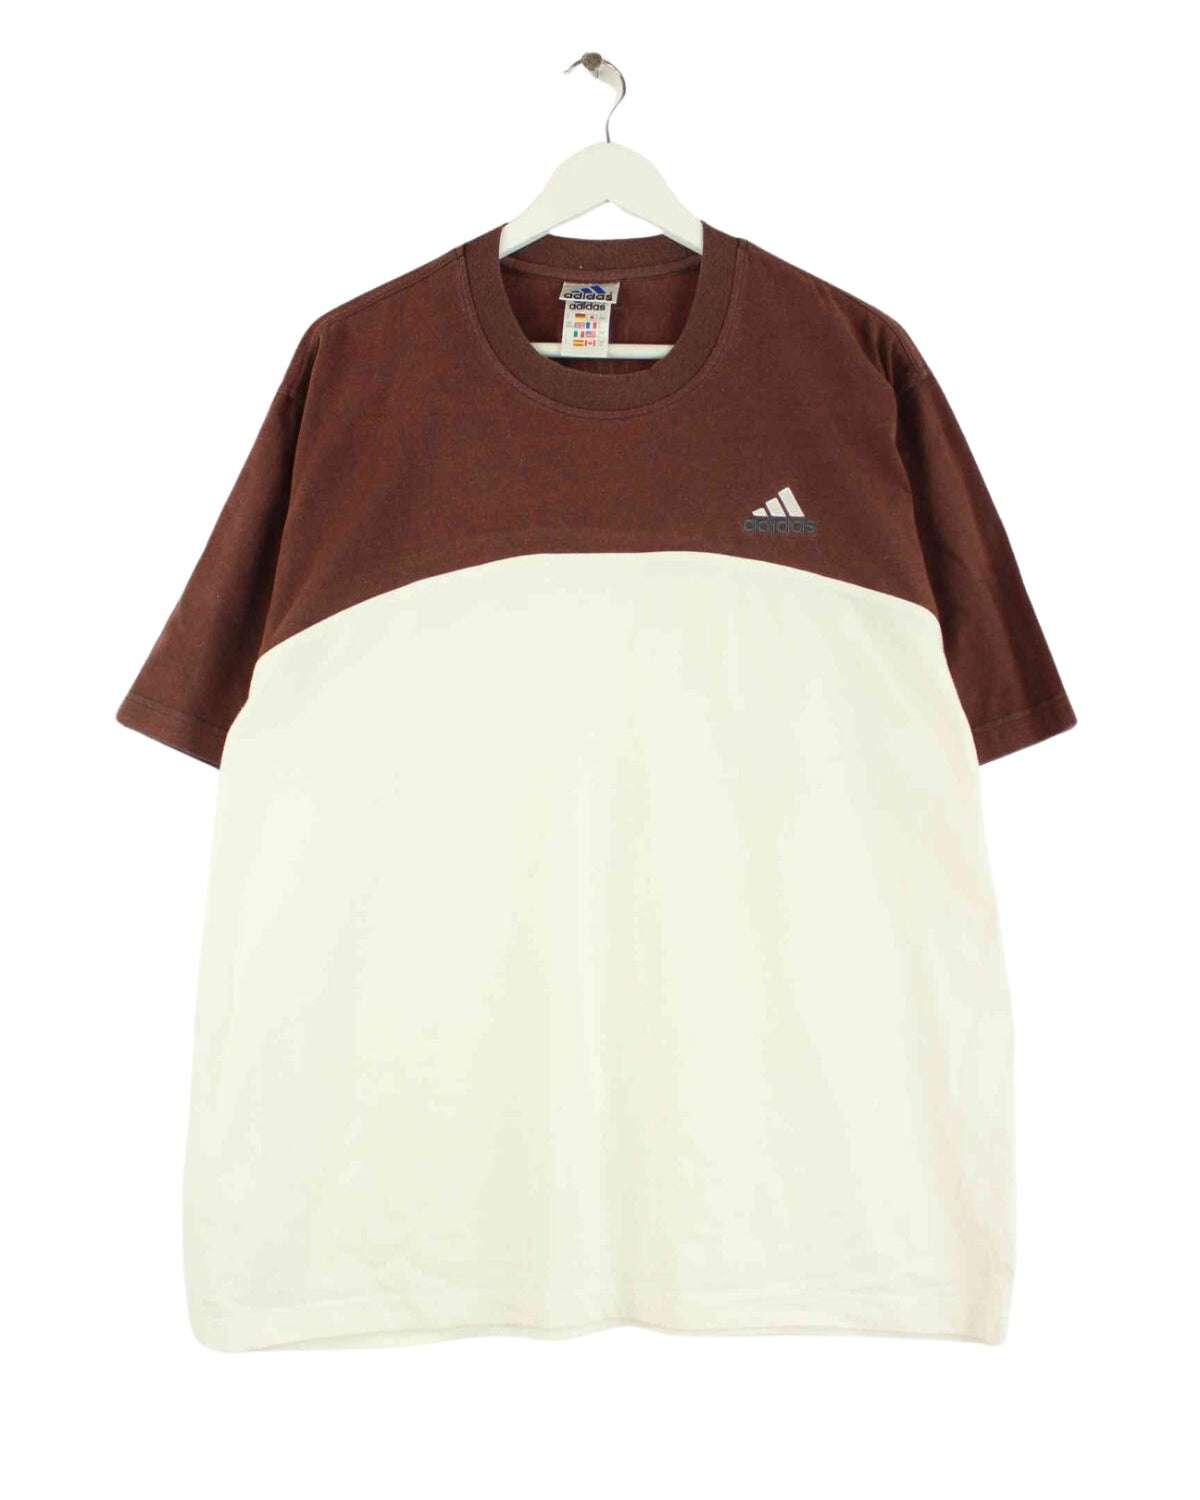 Adidas 90s Vintage Performance T-Shirt Weiß XL (front image)